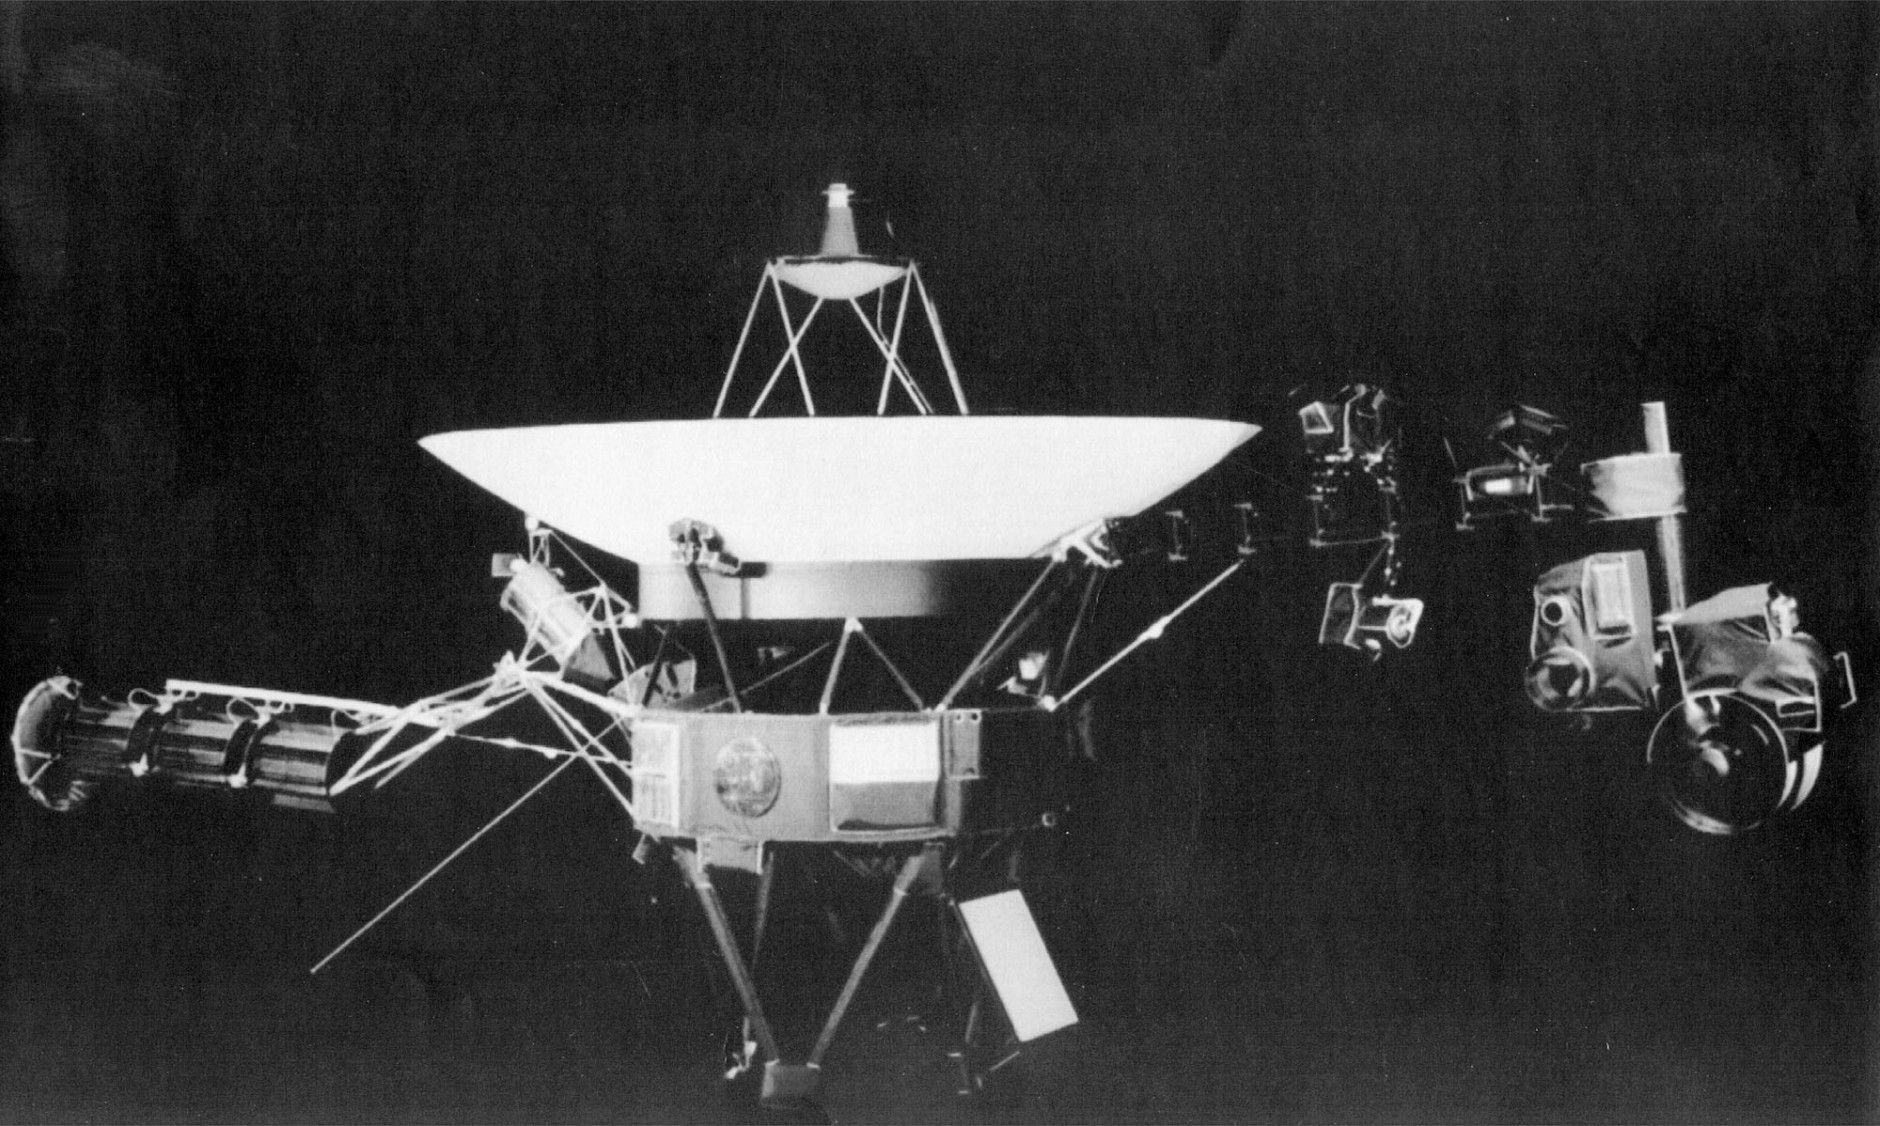 On this date in 1981, the U.S. spacecraft Voyager 2 came within 63,000 miles of Saturn's cloud cover, sending back pictures of and data about the ringed planet. (AP-Photo/HO) 